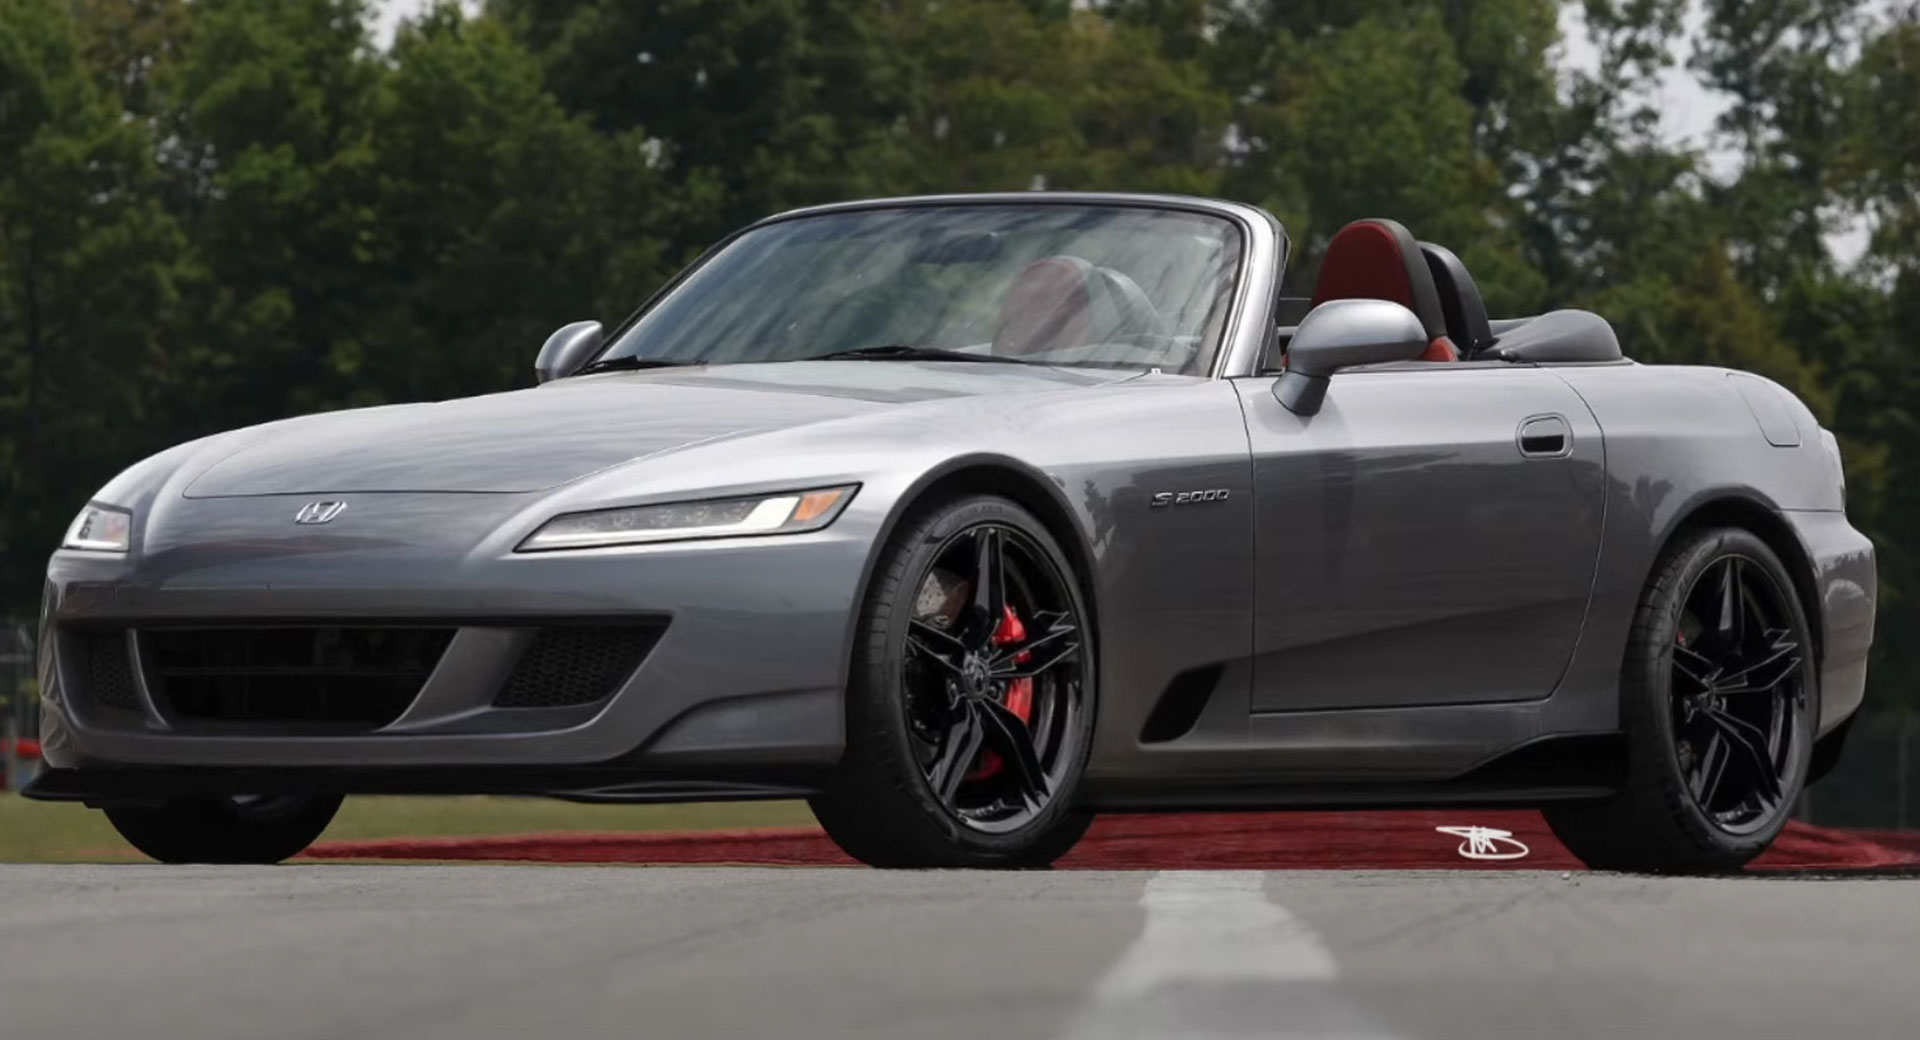 How About A Modern Day Honda S2000 That Stays True To The Recipe Of The